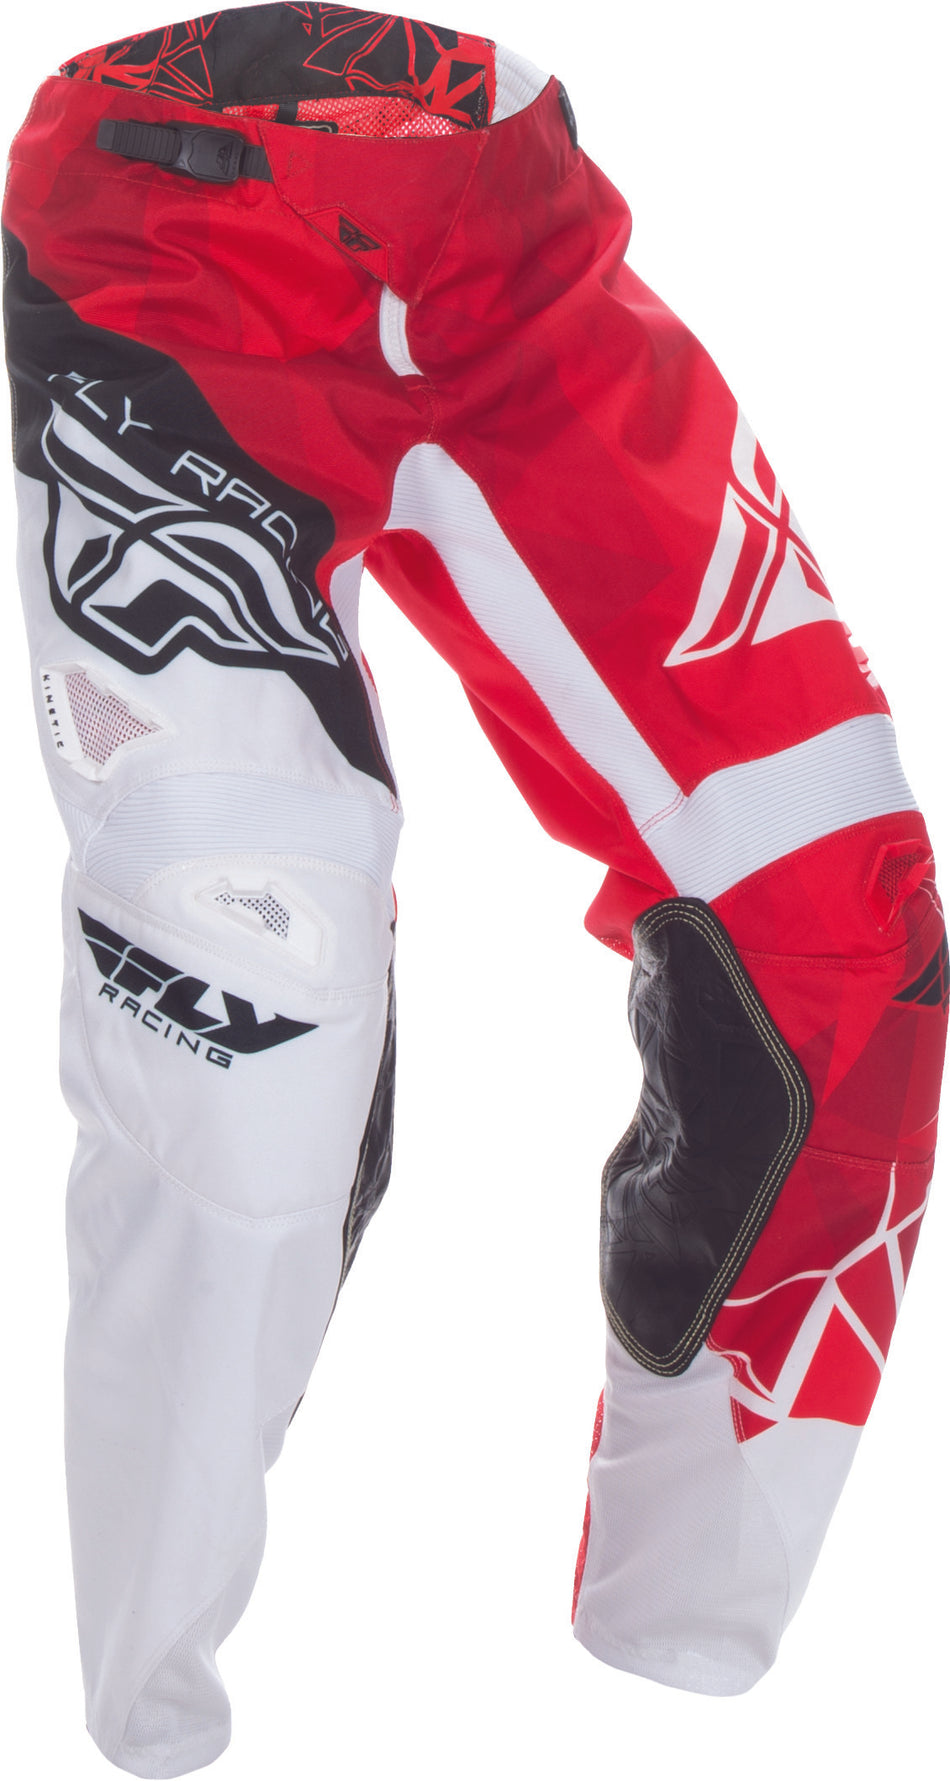 FLY RACING Kinetic Crux Pant Red/White Sz 26 370-53226